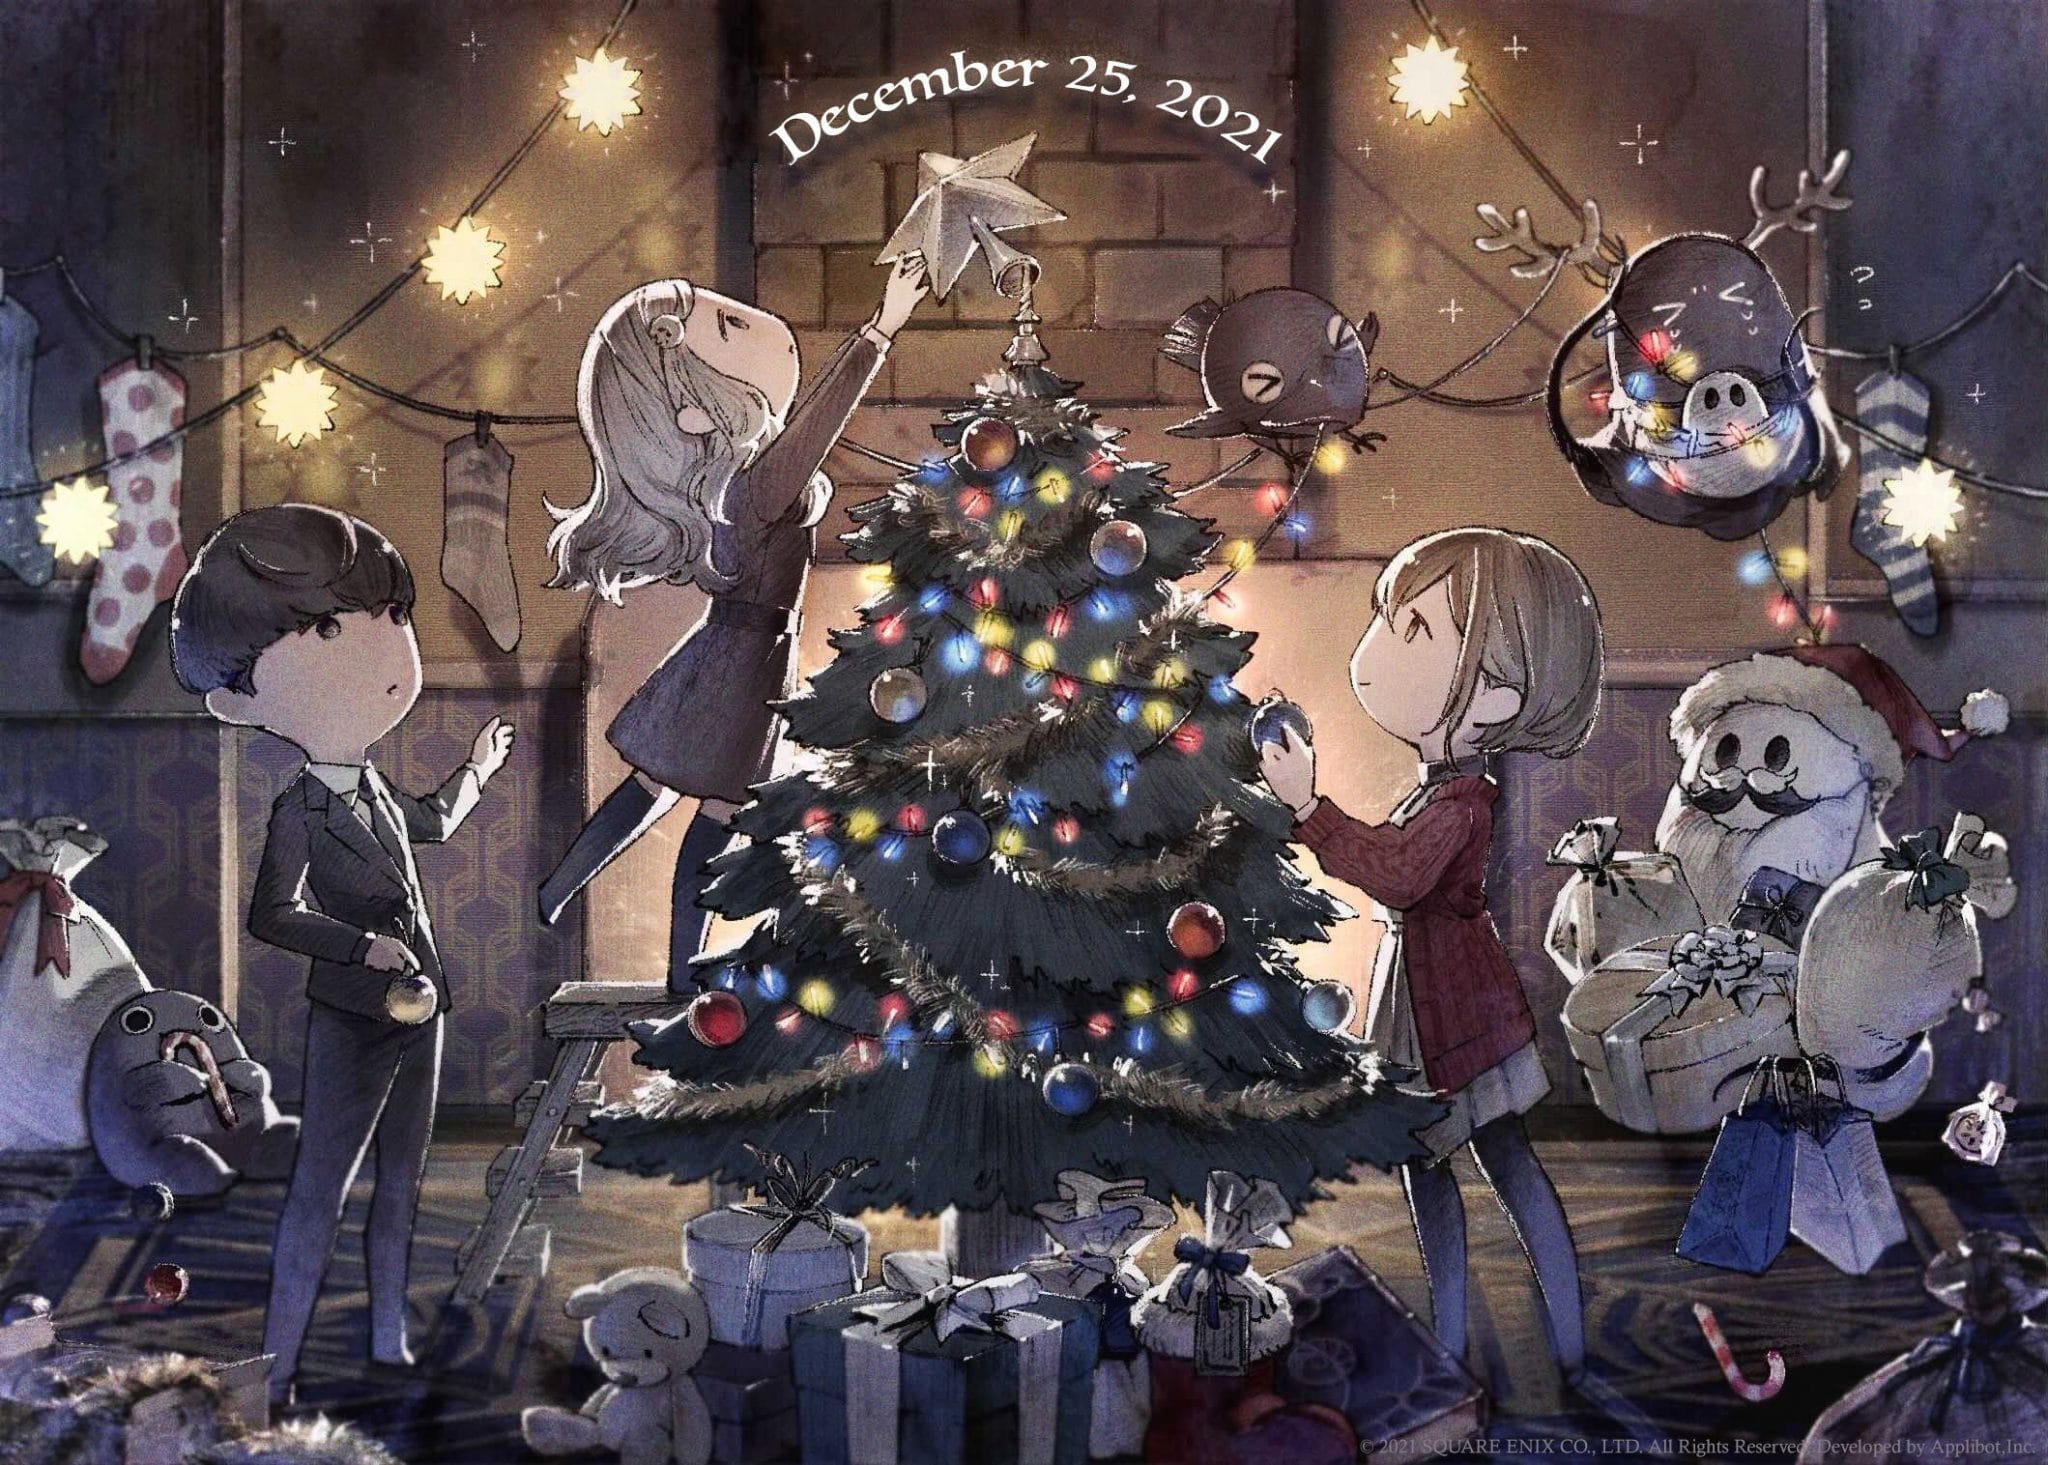 NieR Re[in]carnation Shares Wholesome Christmas Artwork